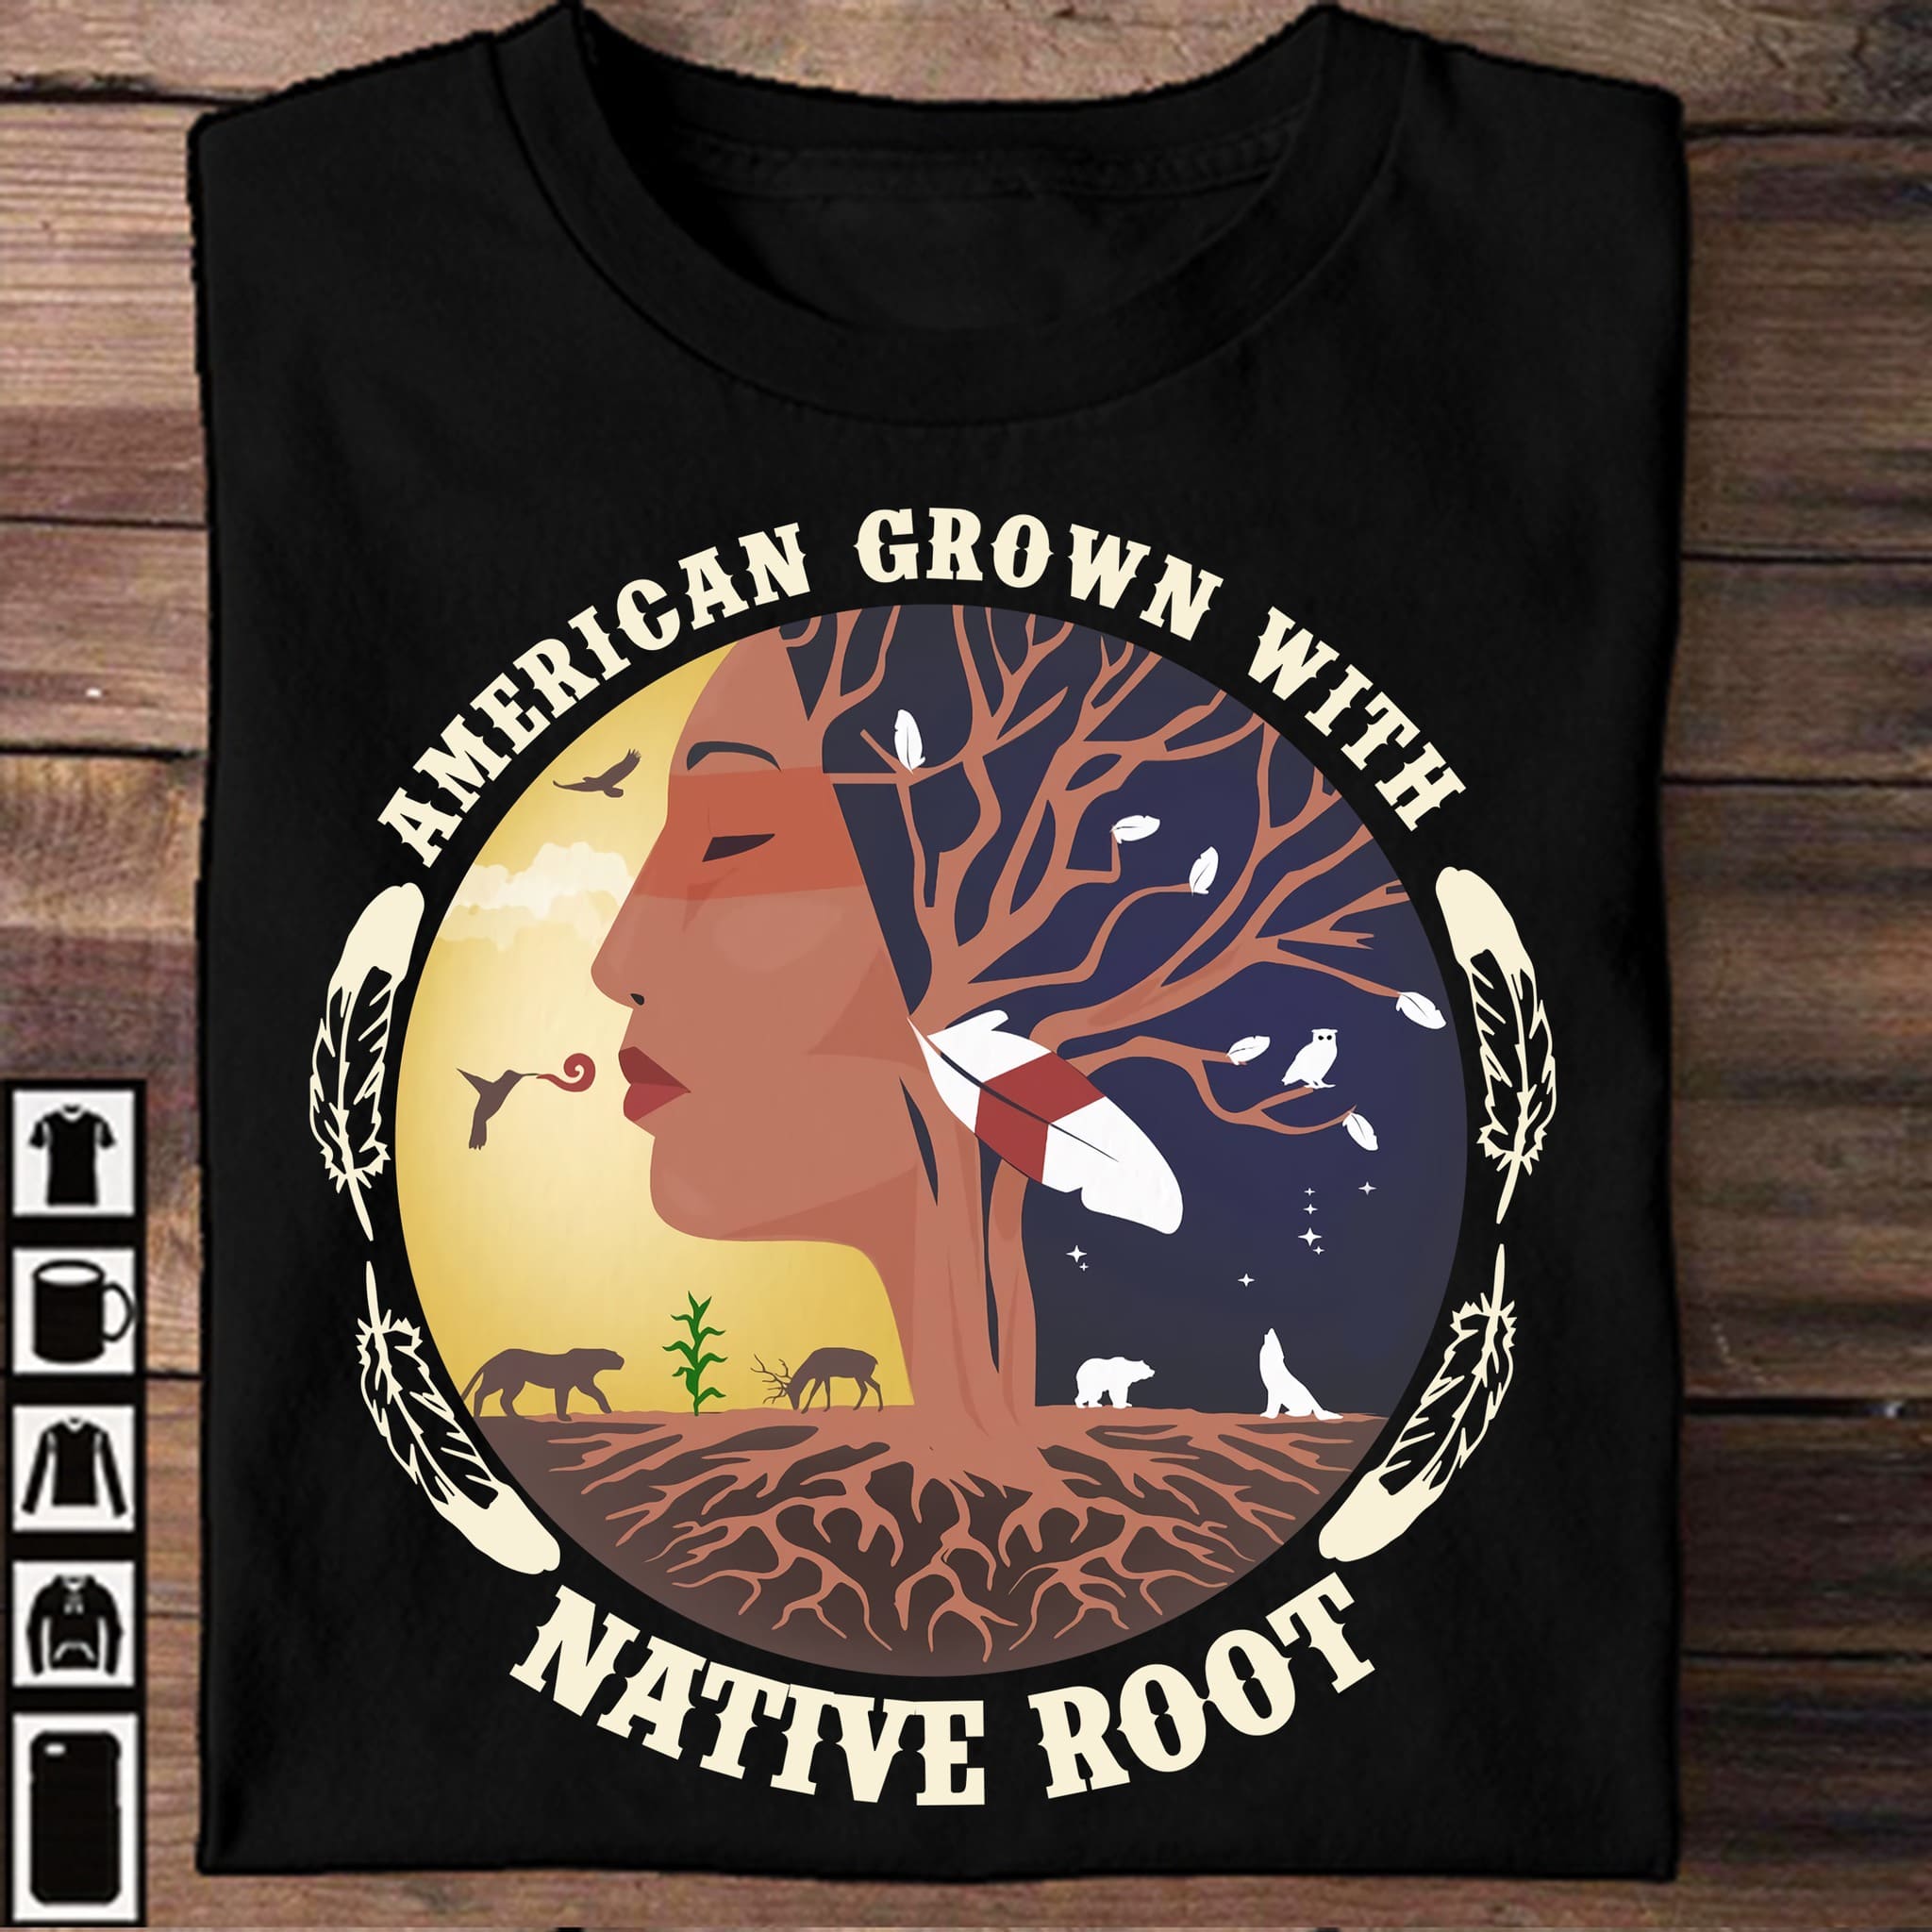 American grown with Native root - Native American woman, indigenous native woman